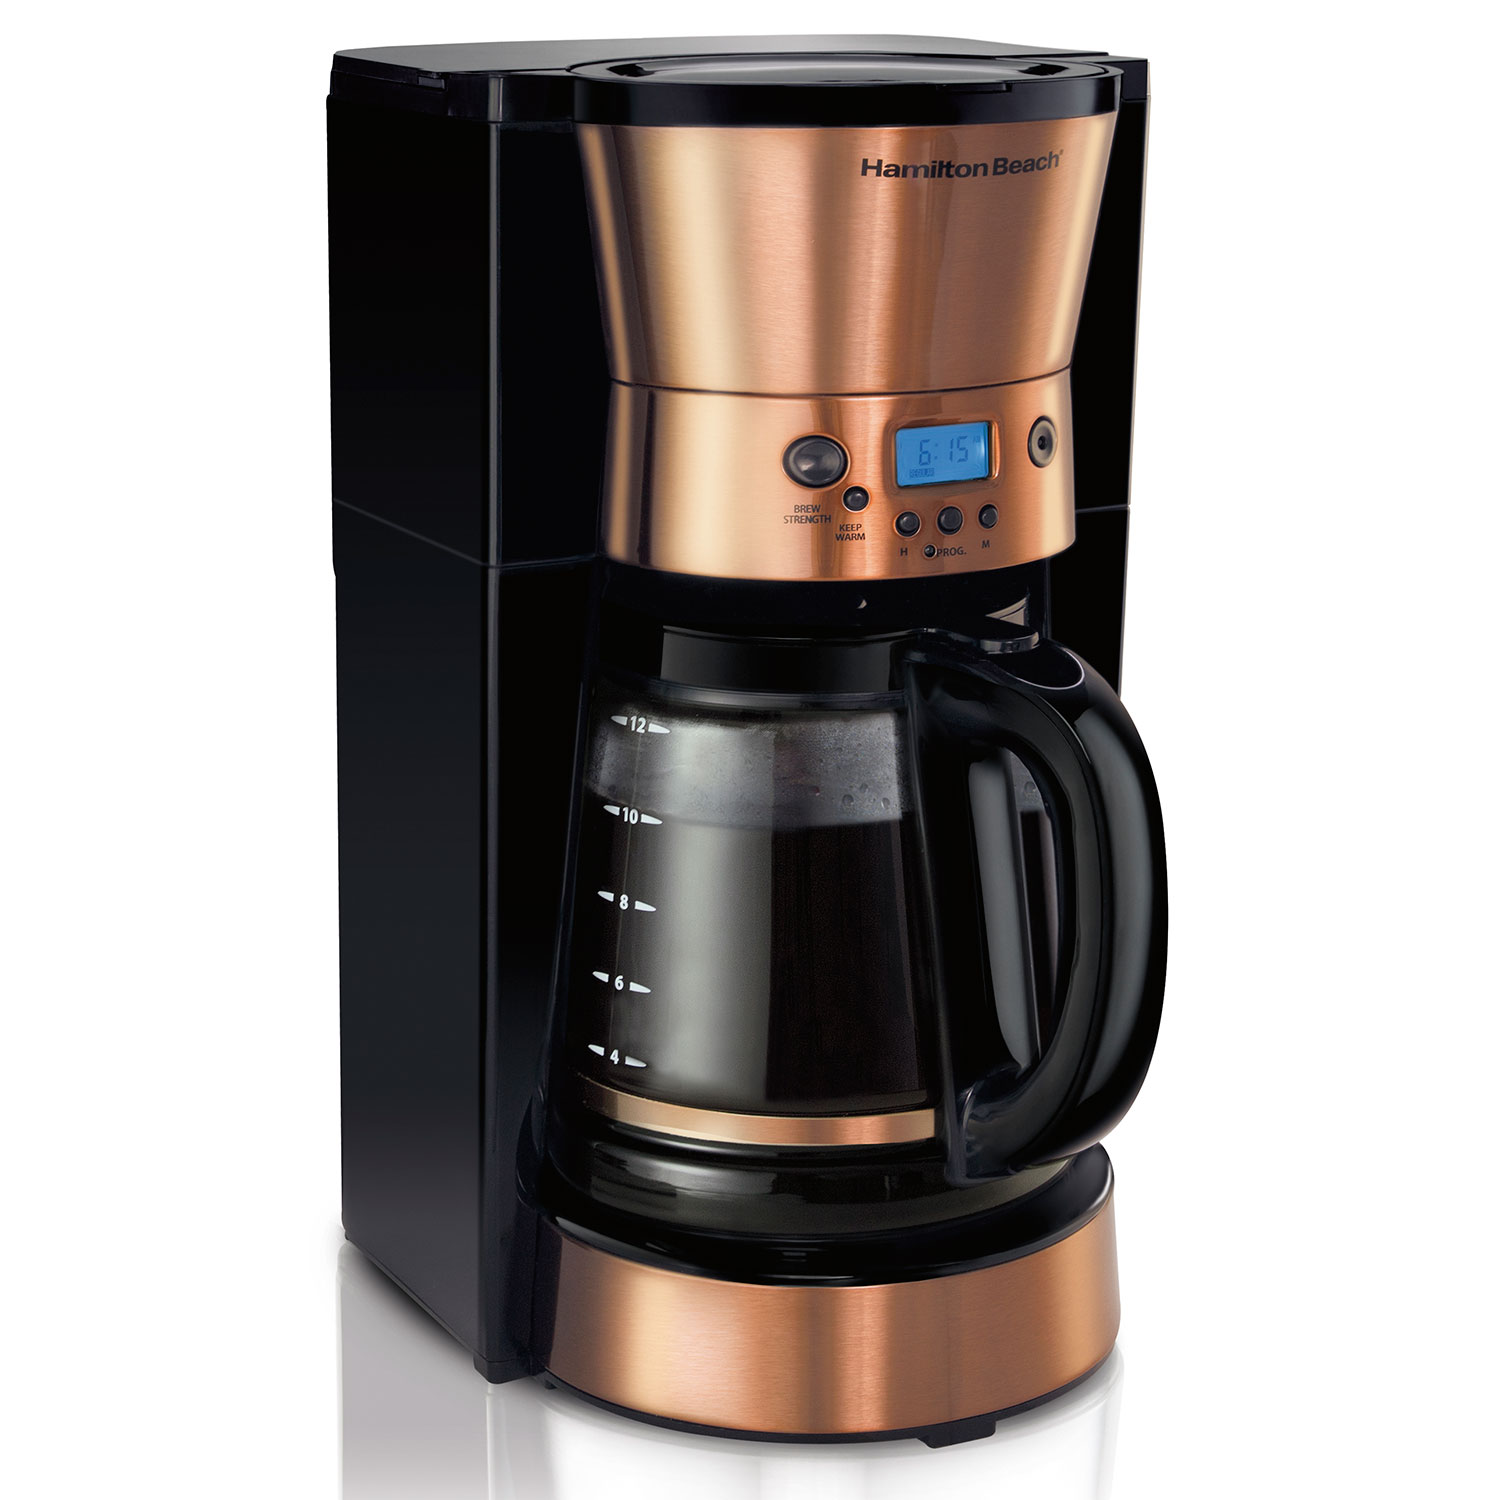 FrontFill® 12 Cup Programmable Coffee Maker with Copper Accents (46898)